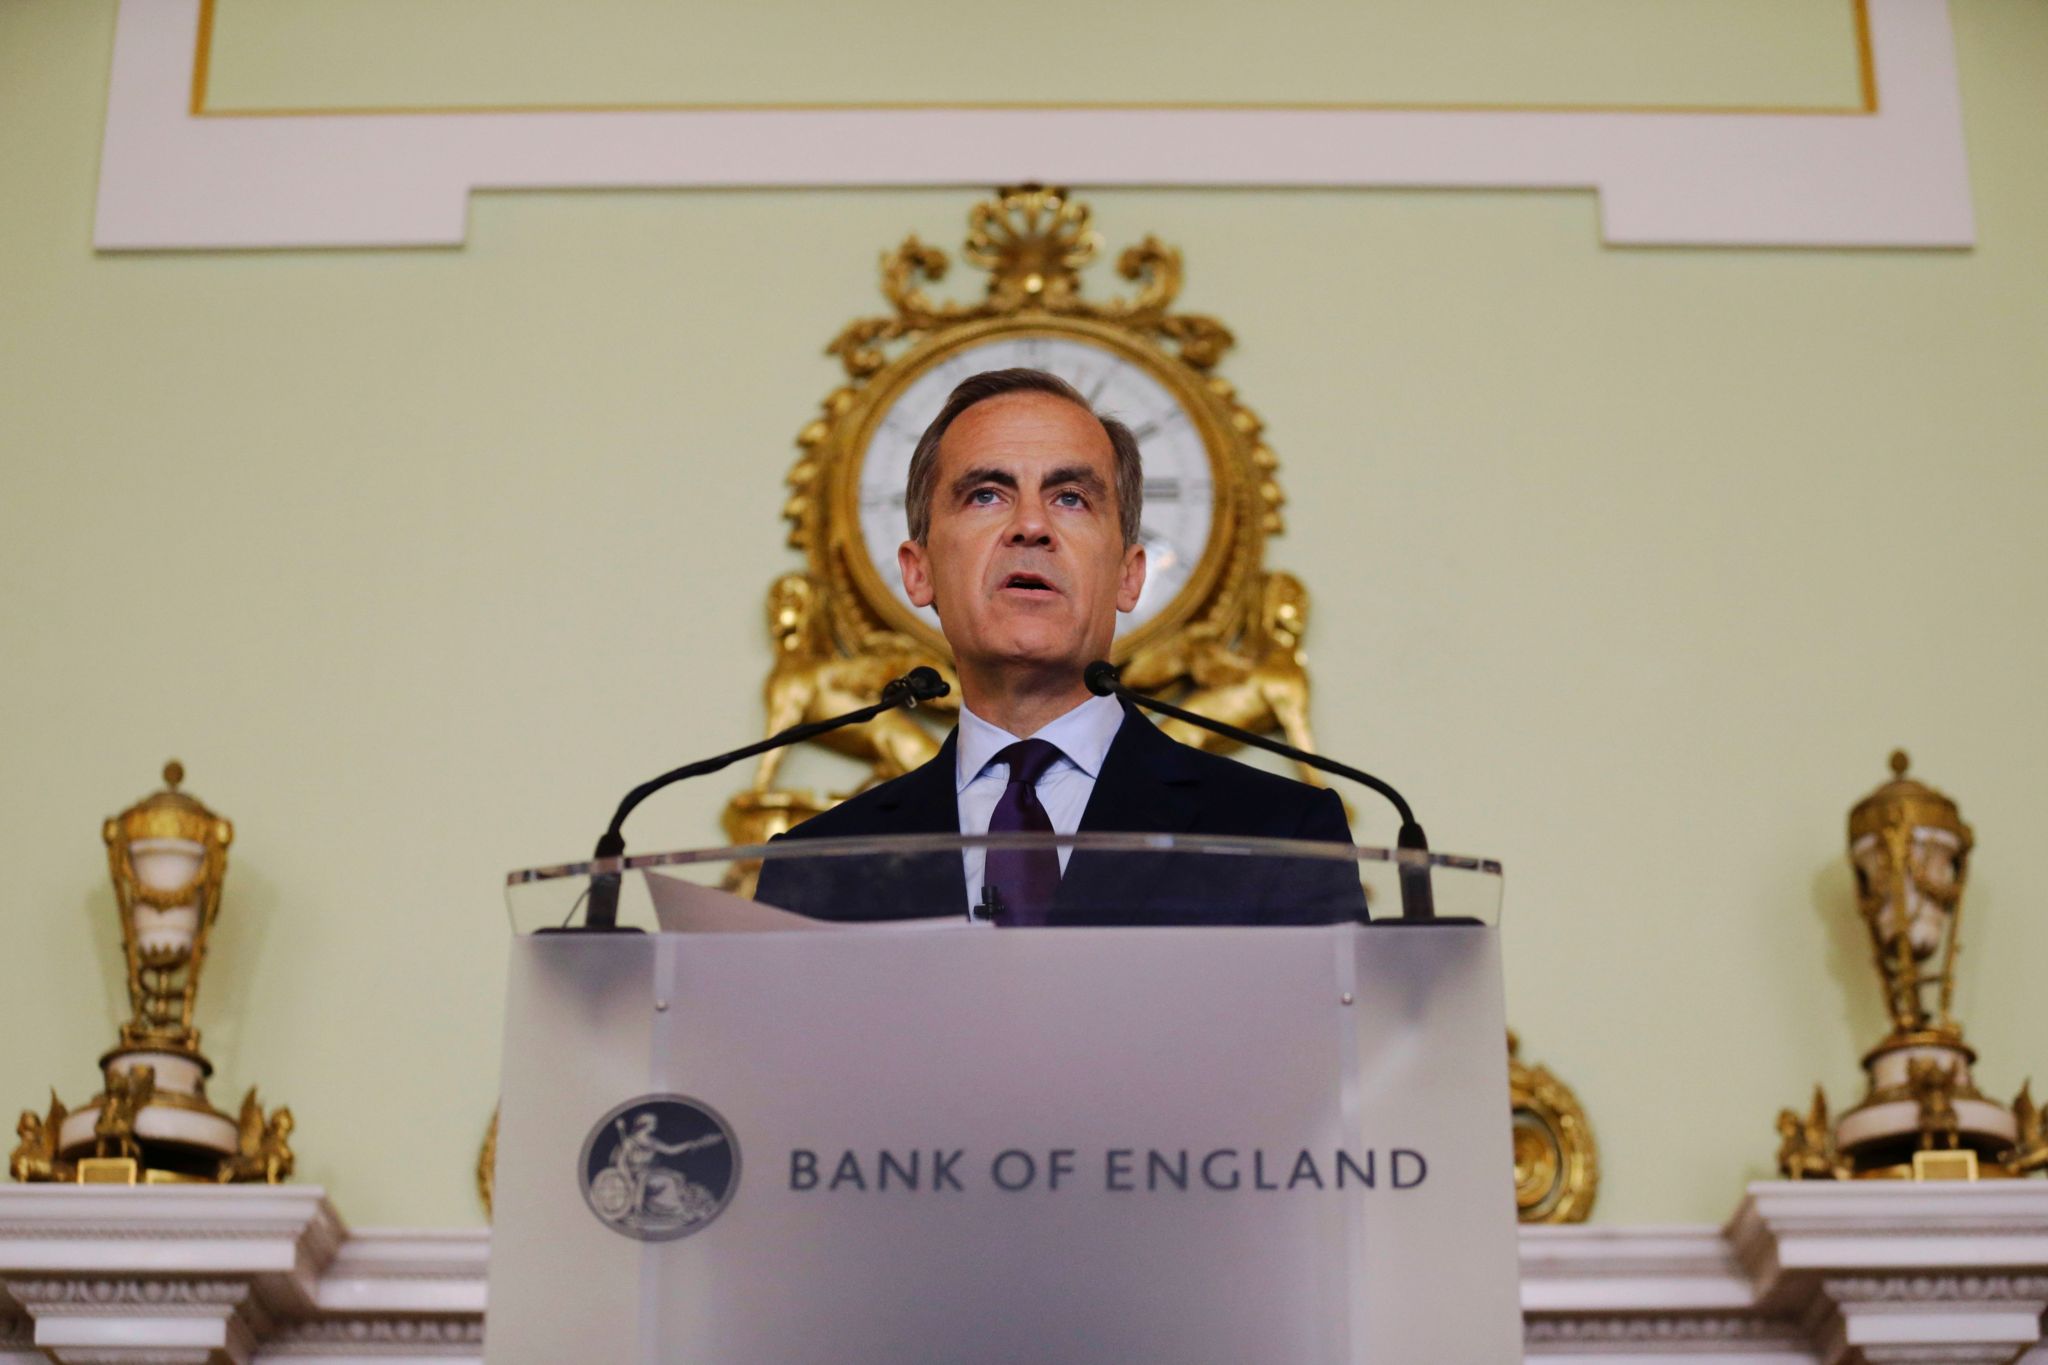 Mark Carney addresses the press at the Bank of England in the wake of the 2016 Brexit vote